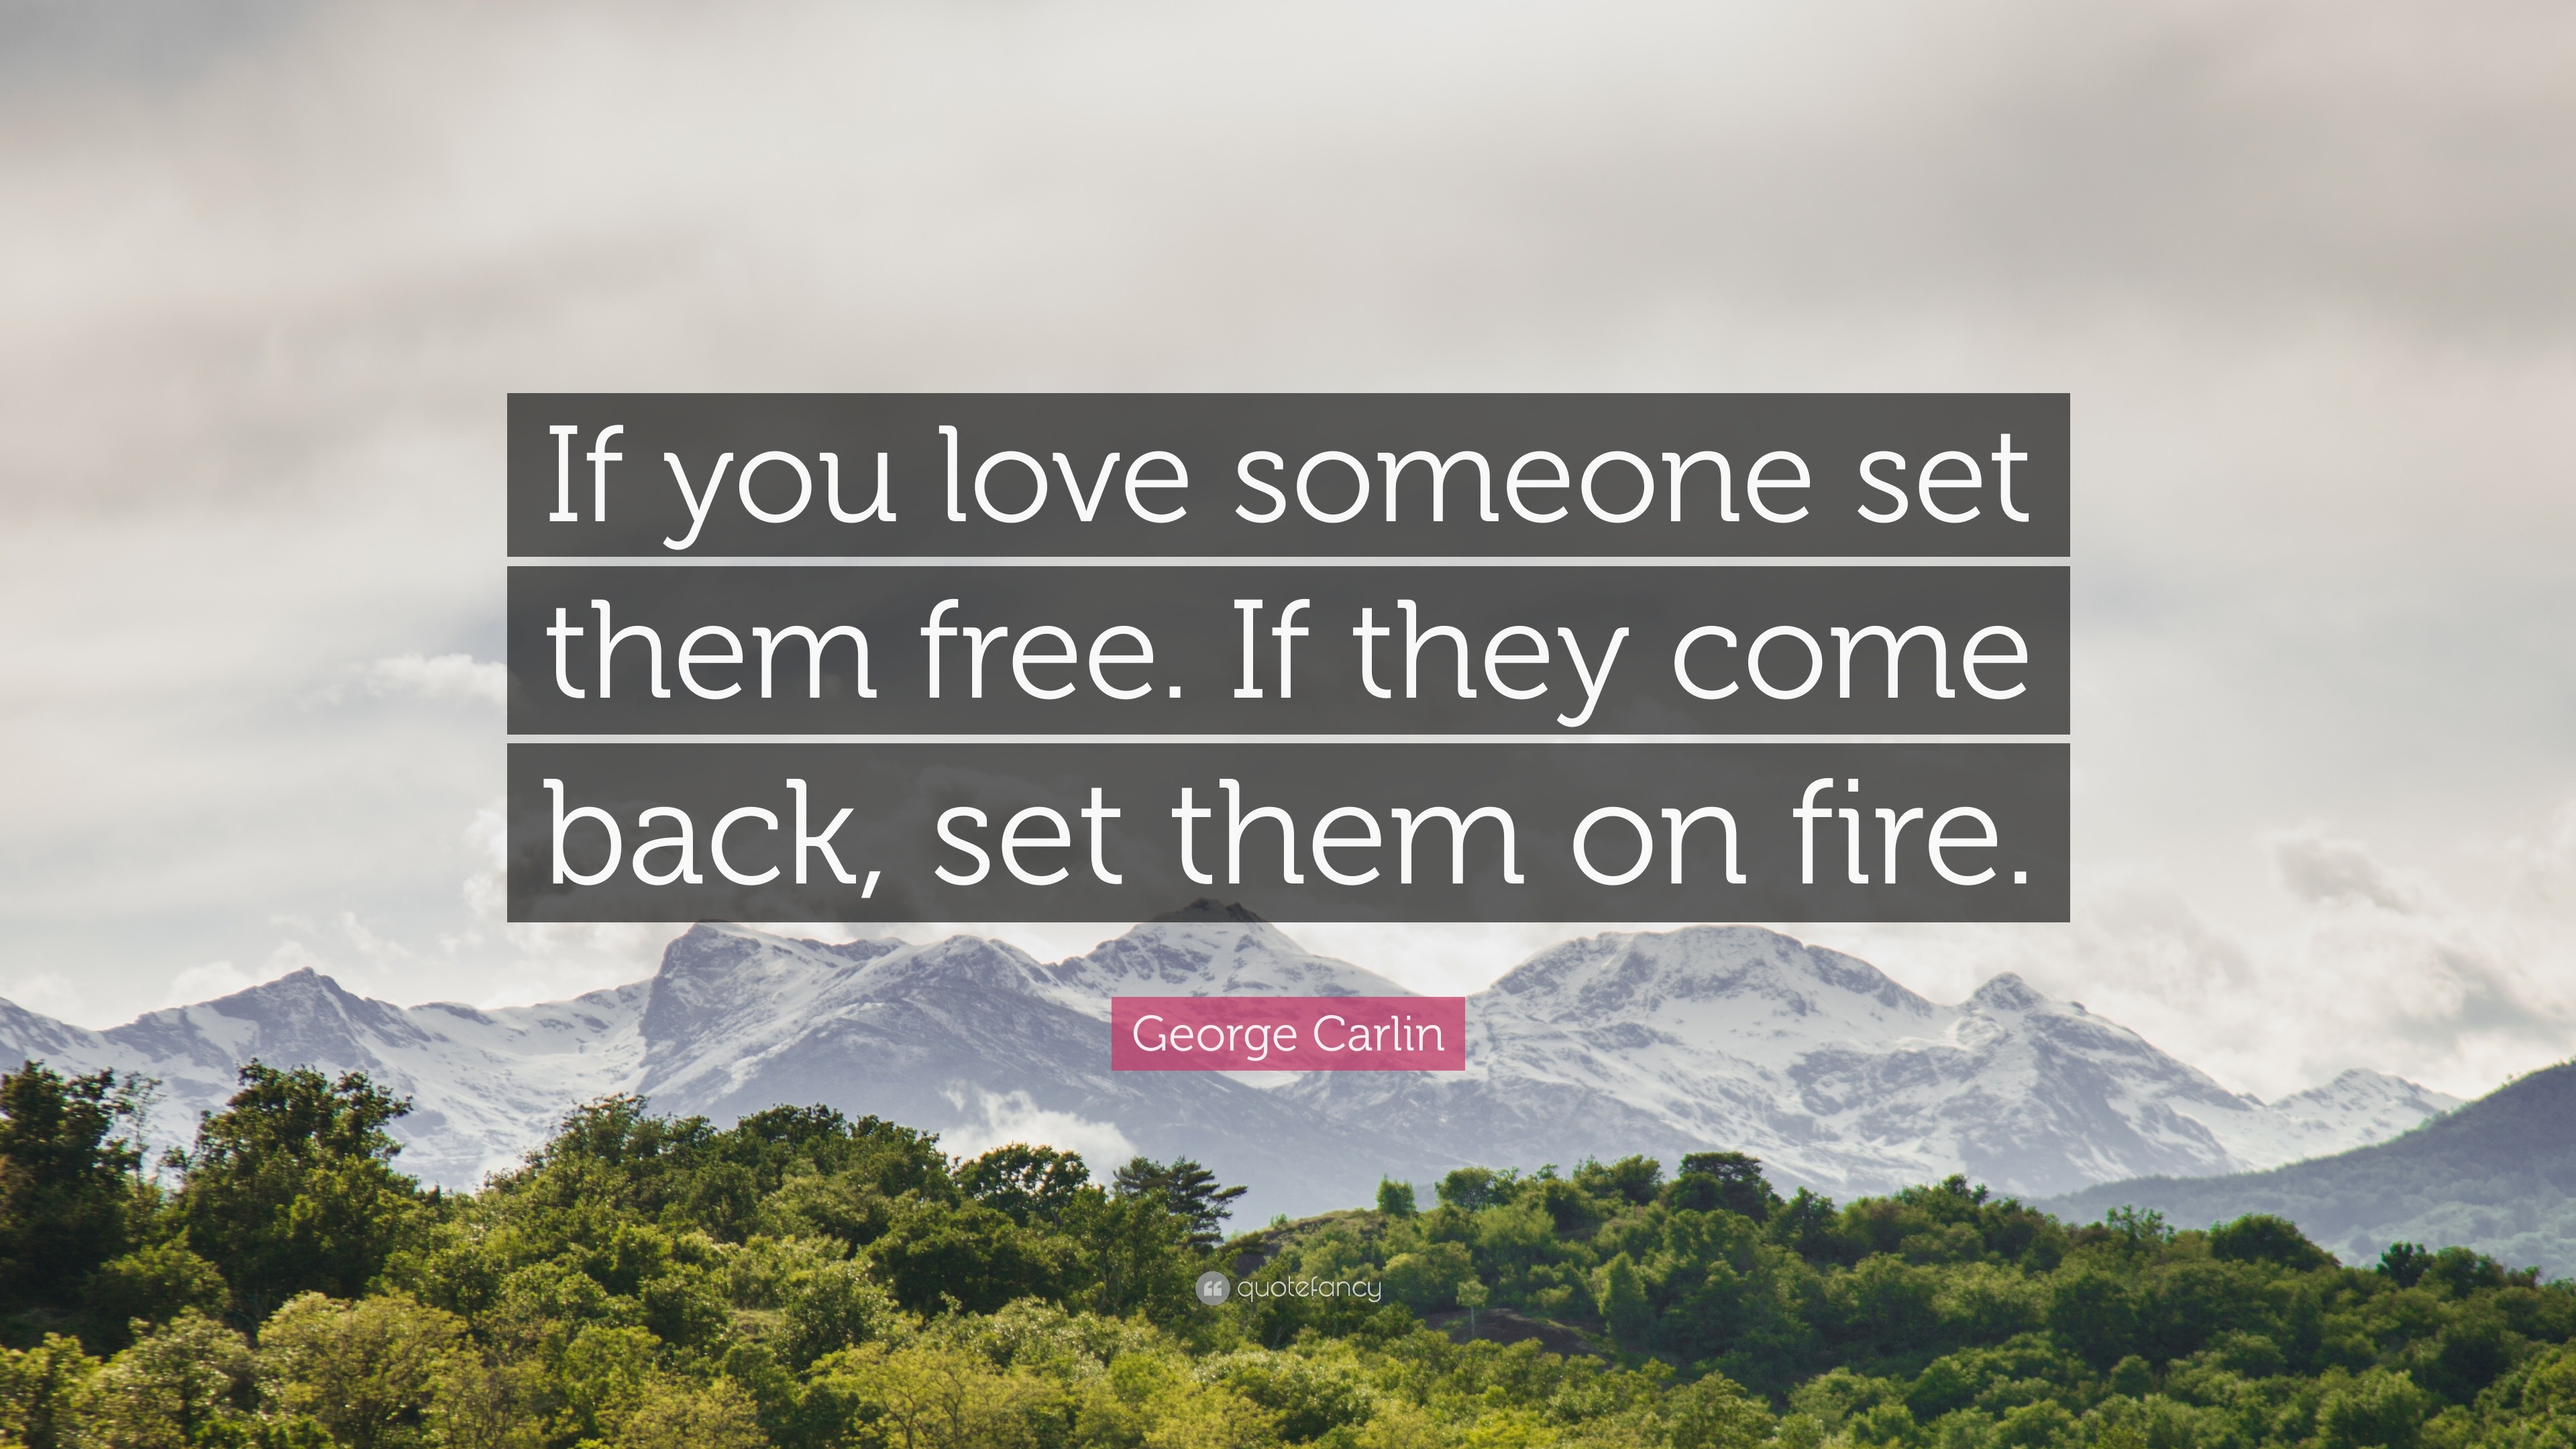 George Carlin Quote “If you love someone set them free If they e